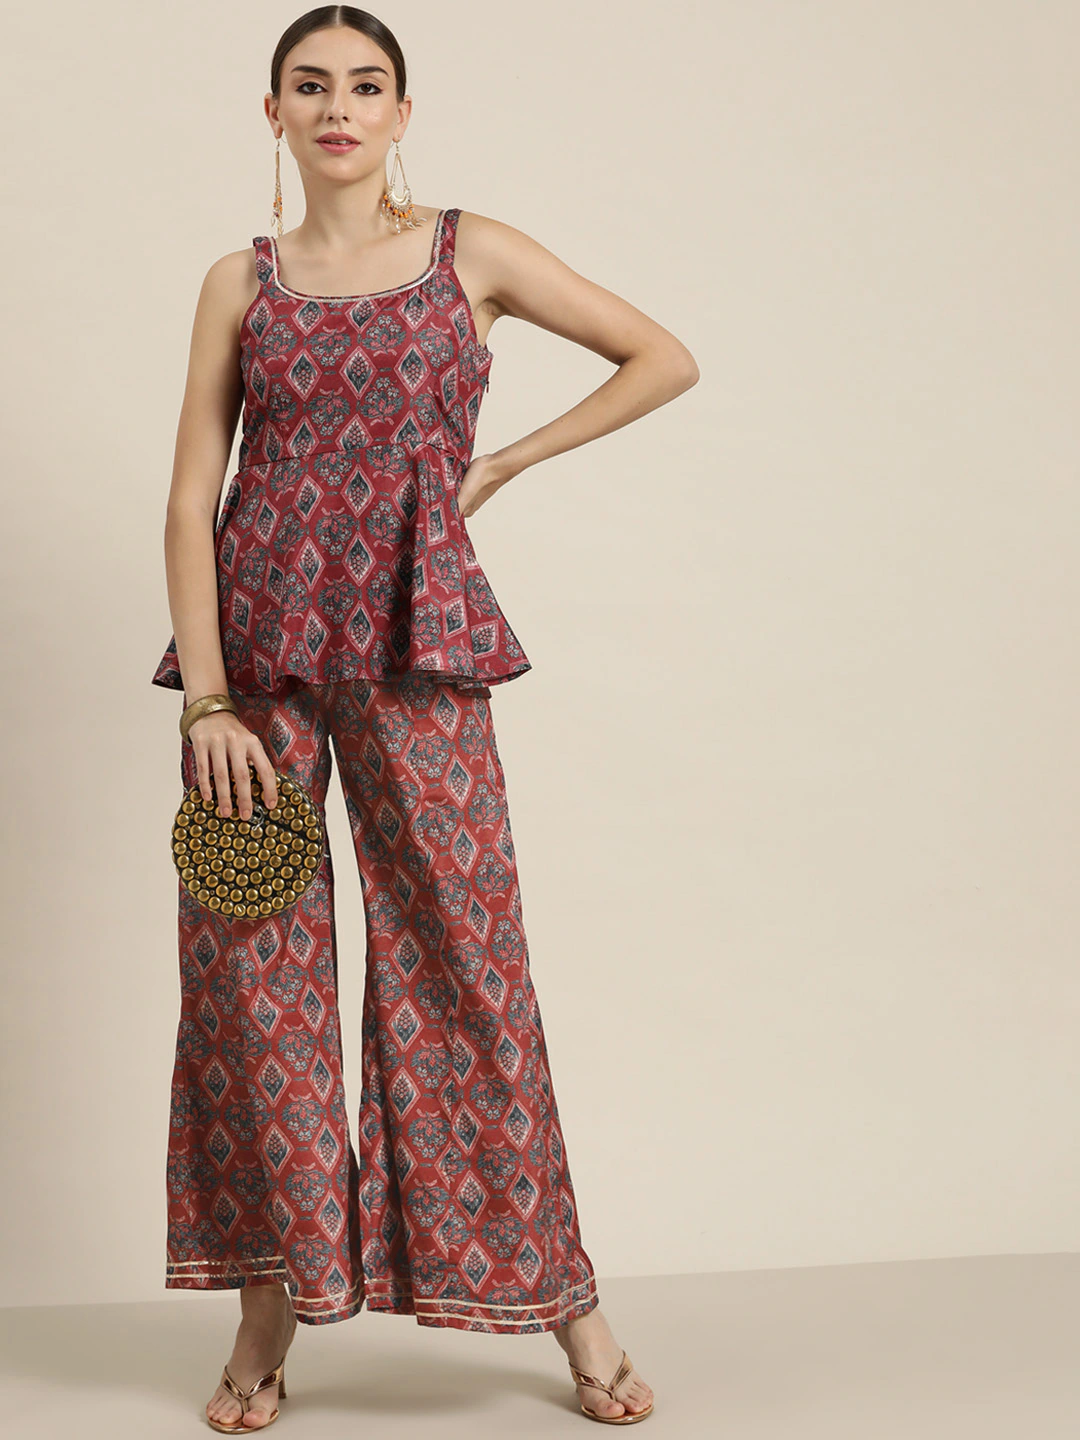 Shop Floral Printed Palazzo Pants with Elasticised Waistband